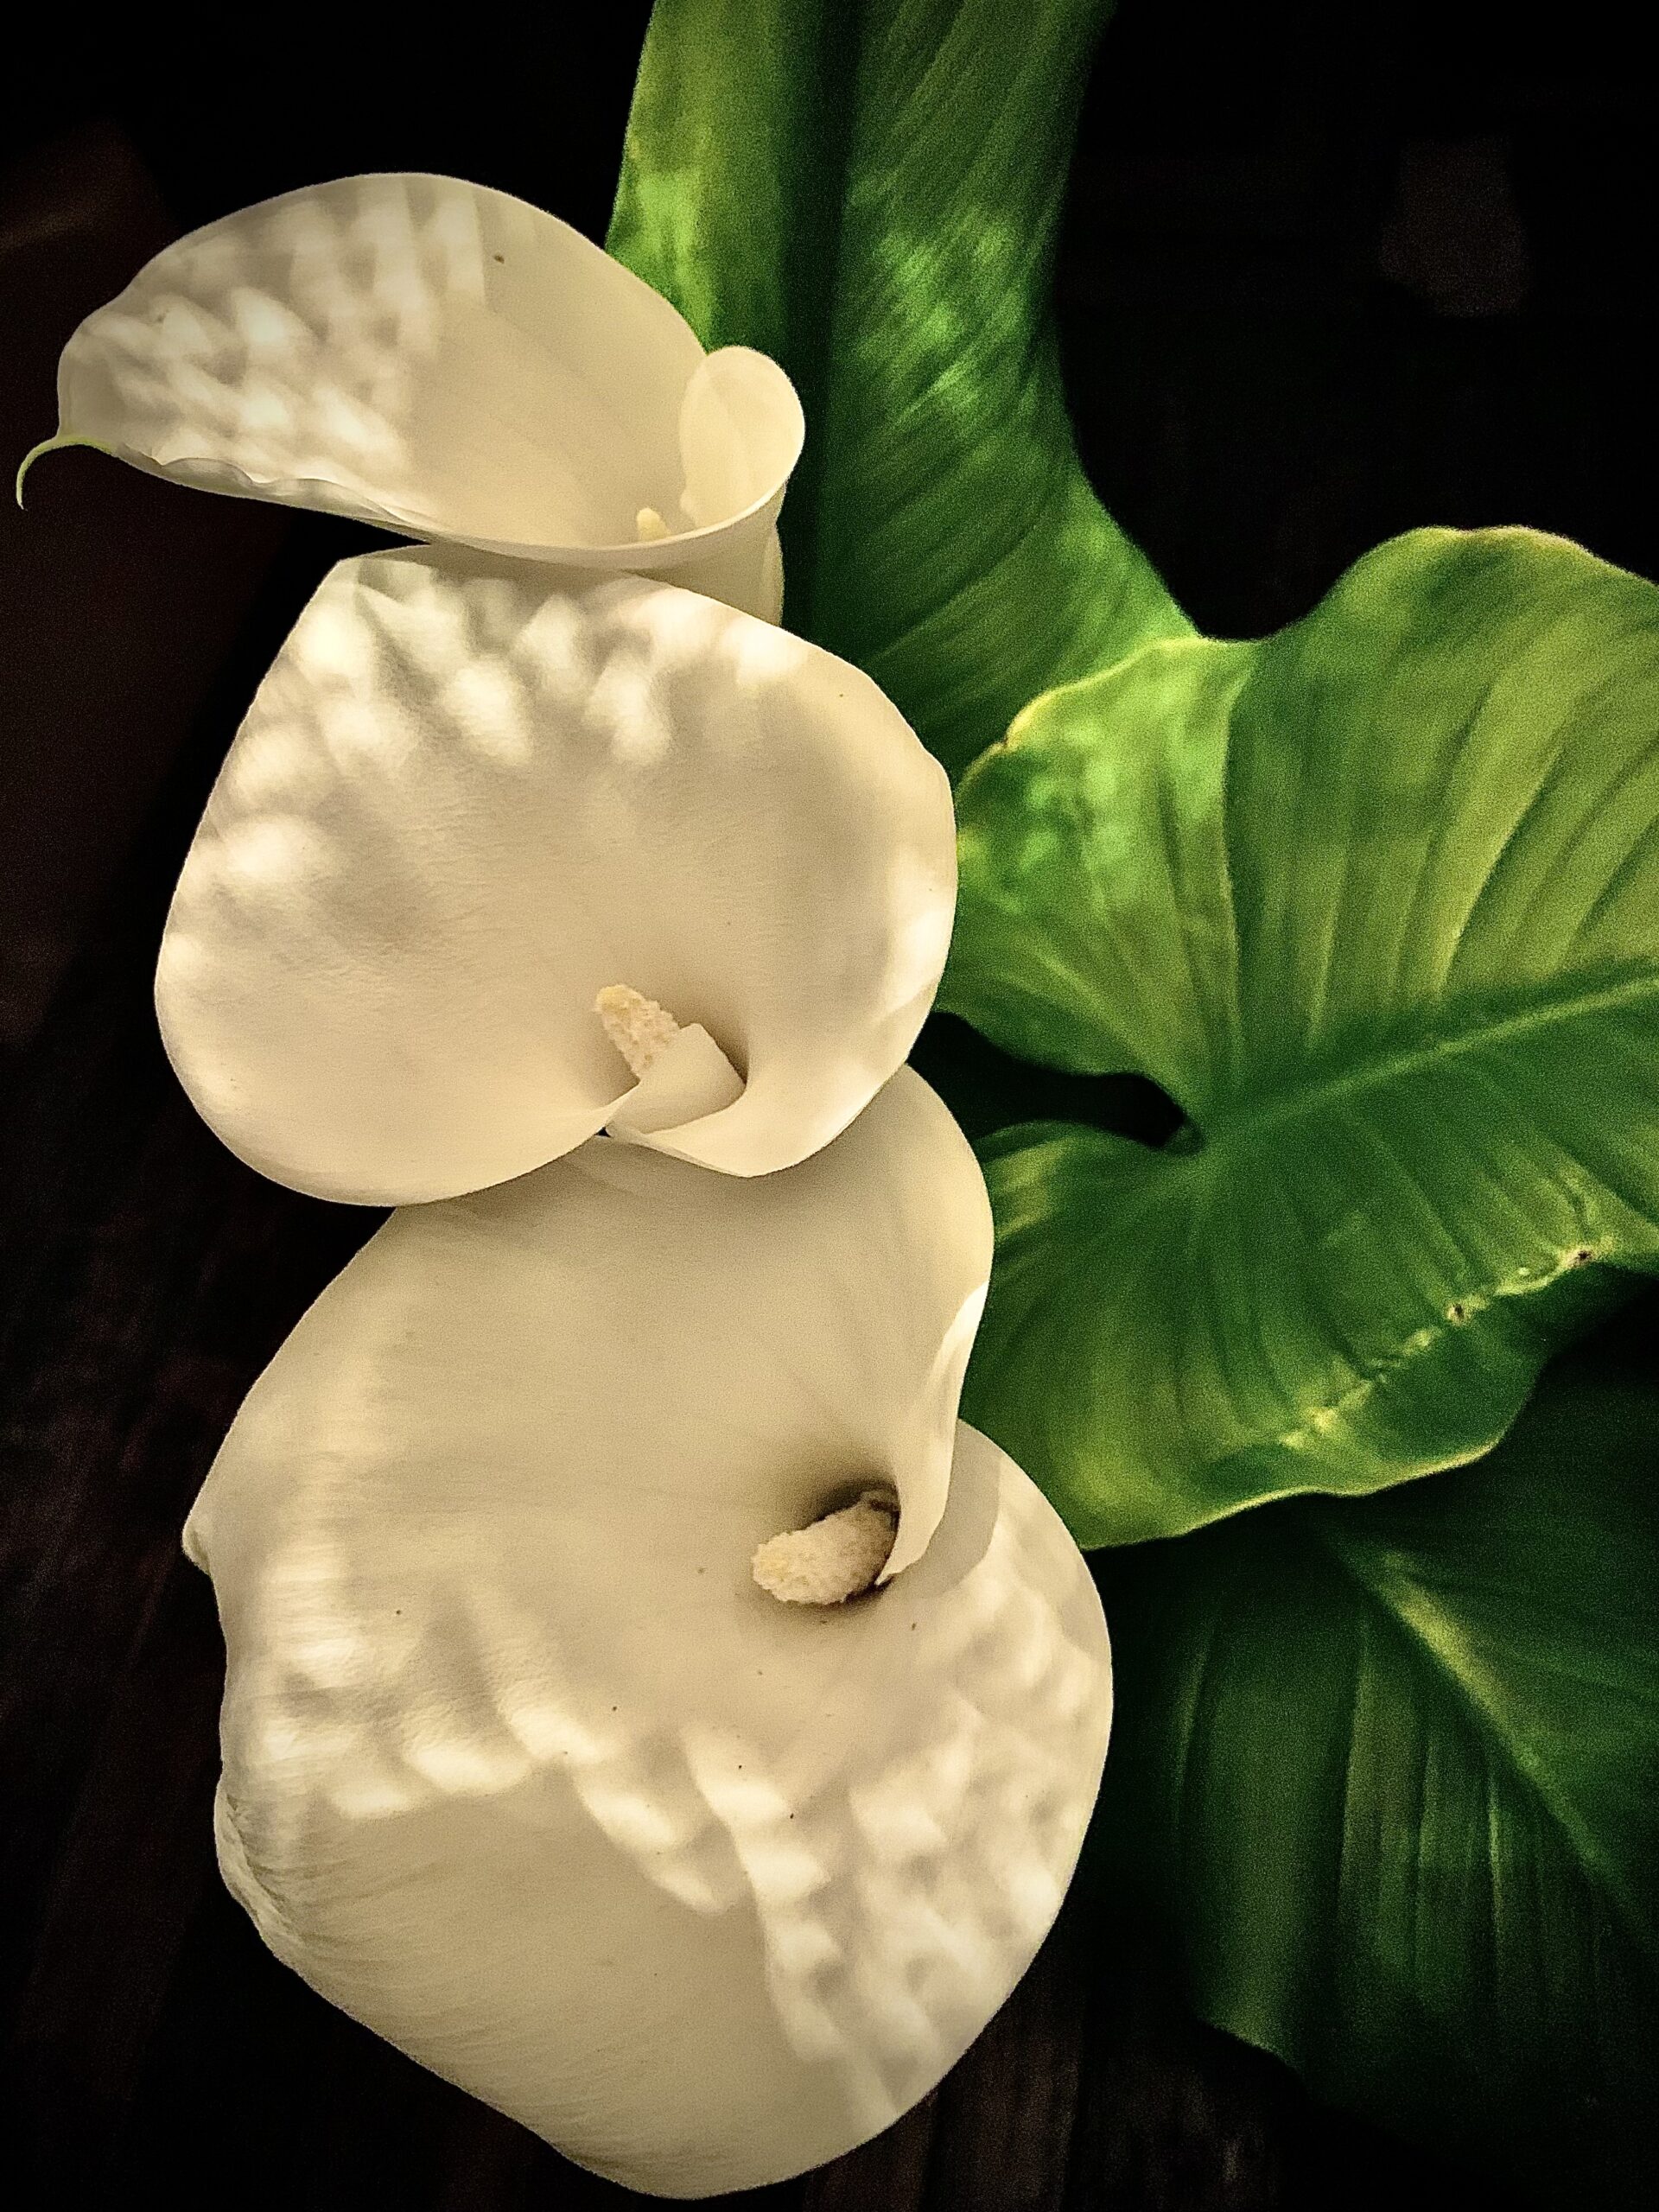 Three white calla lilies with green leaves.